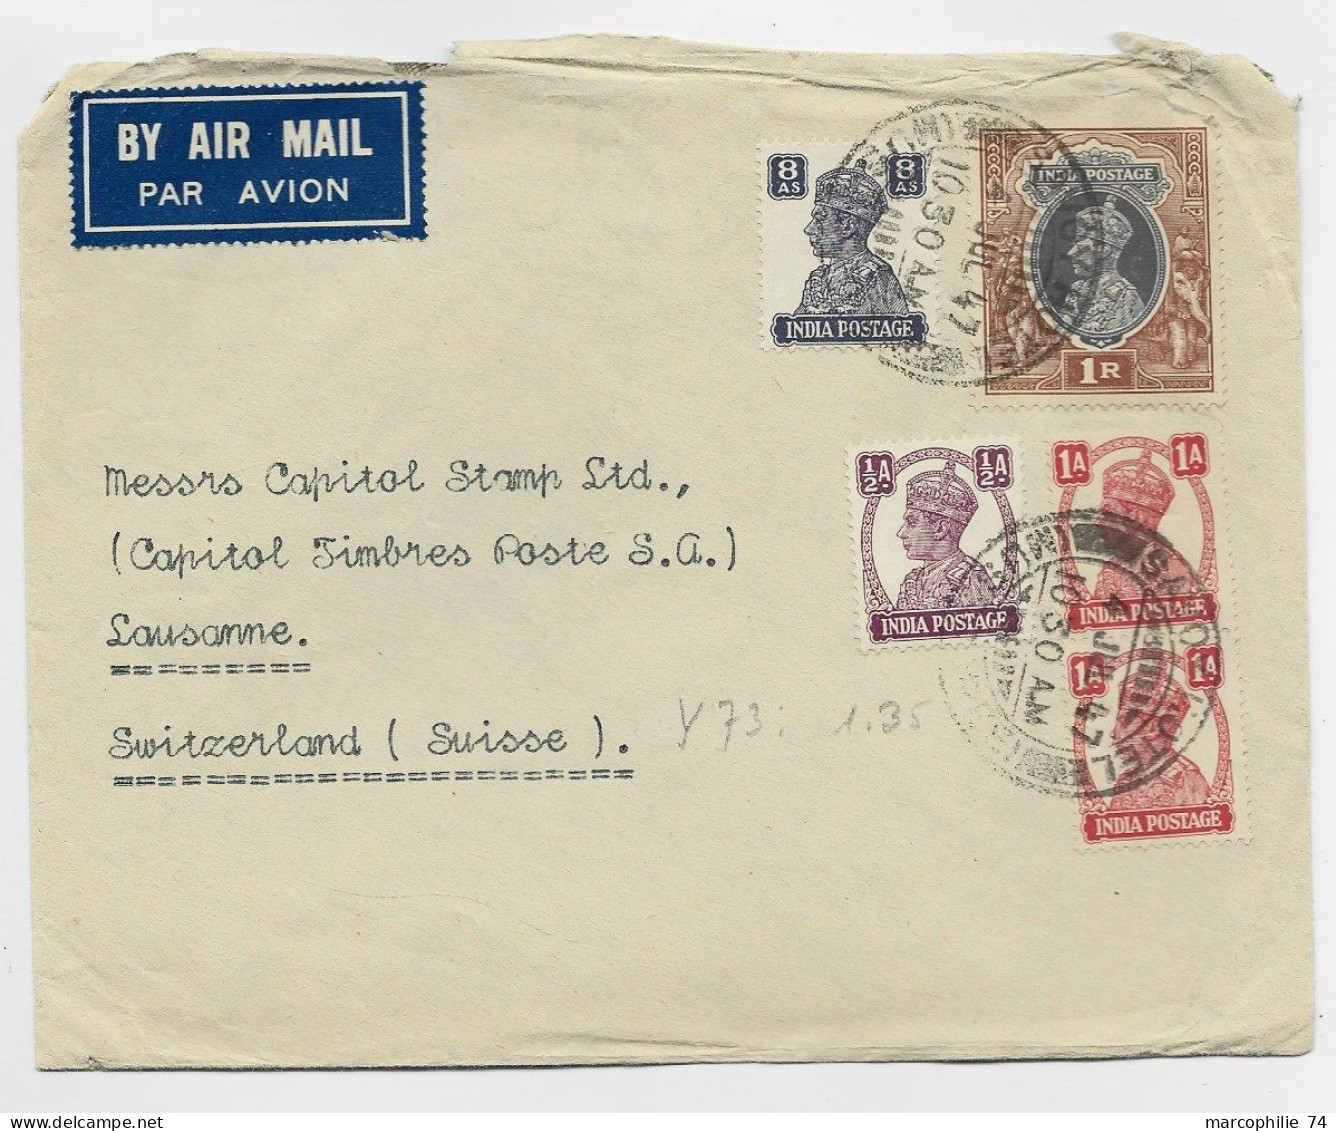 INDIA 1R +8AS+1/2 AS+ 1AX2 LETTRE COVER AIR MAIL SAVOY HOTEL 1947 TO SUISSE - 1936-47 Roi Georges VI